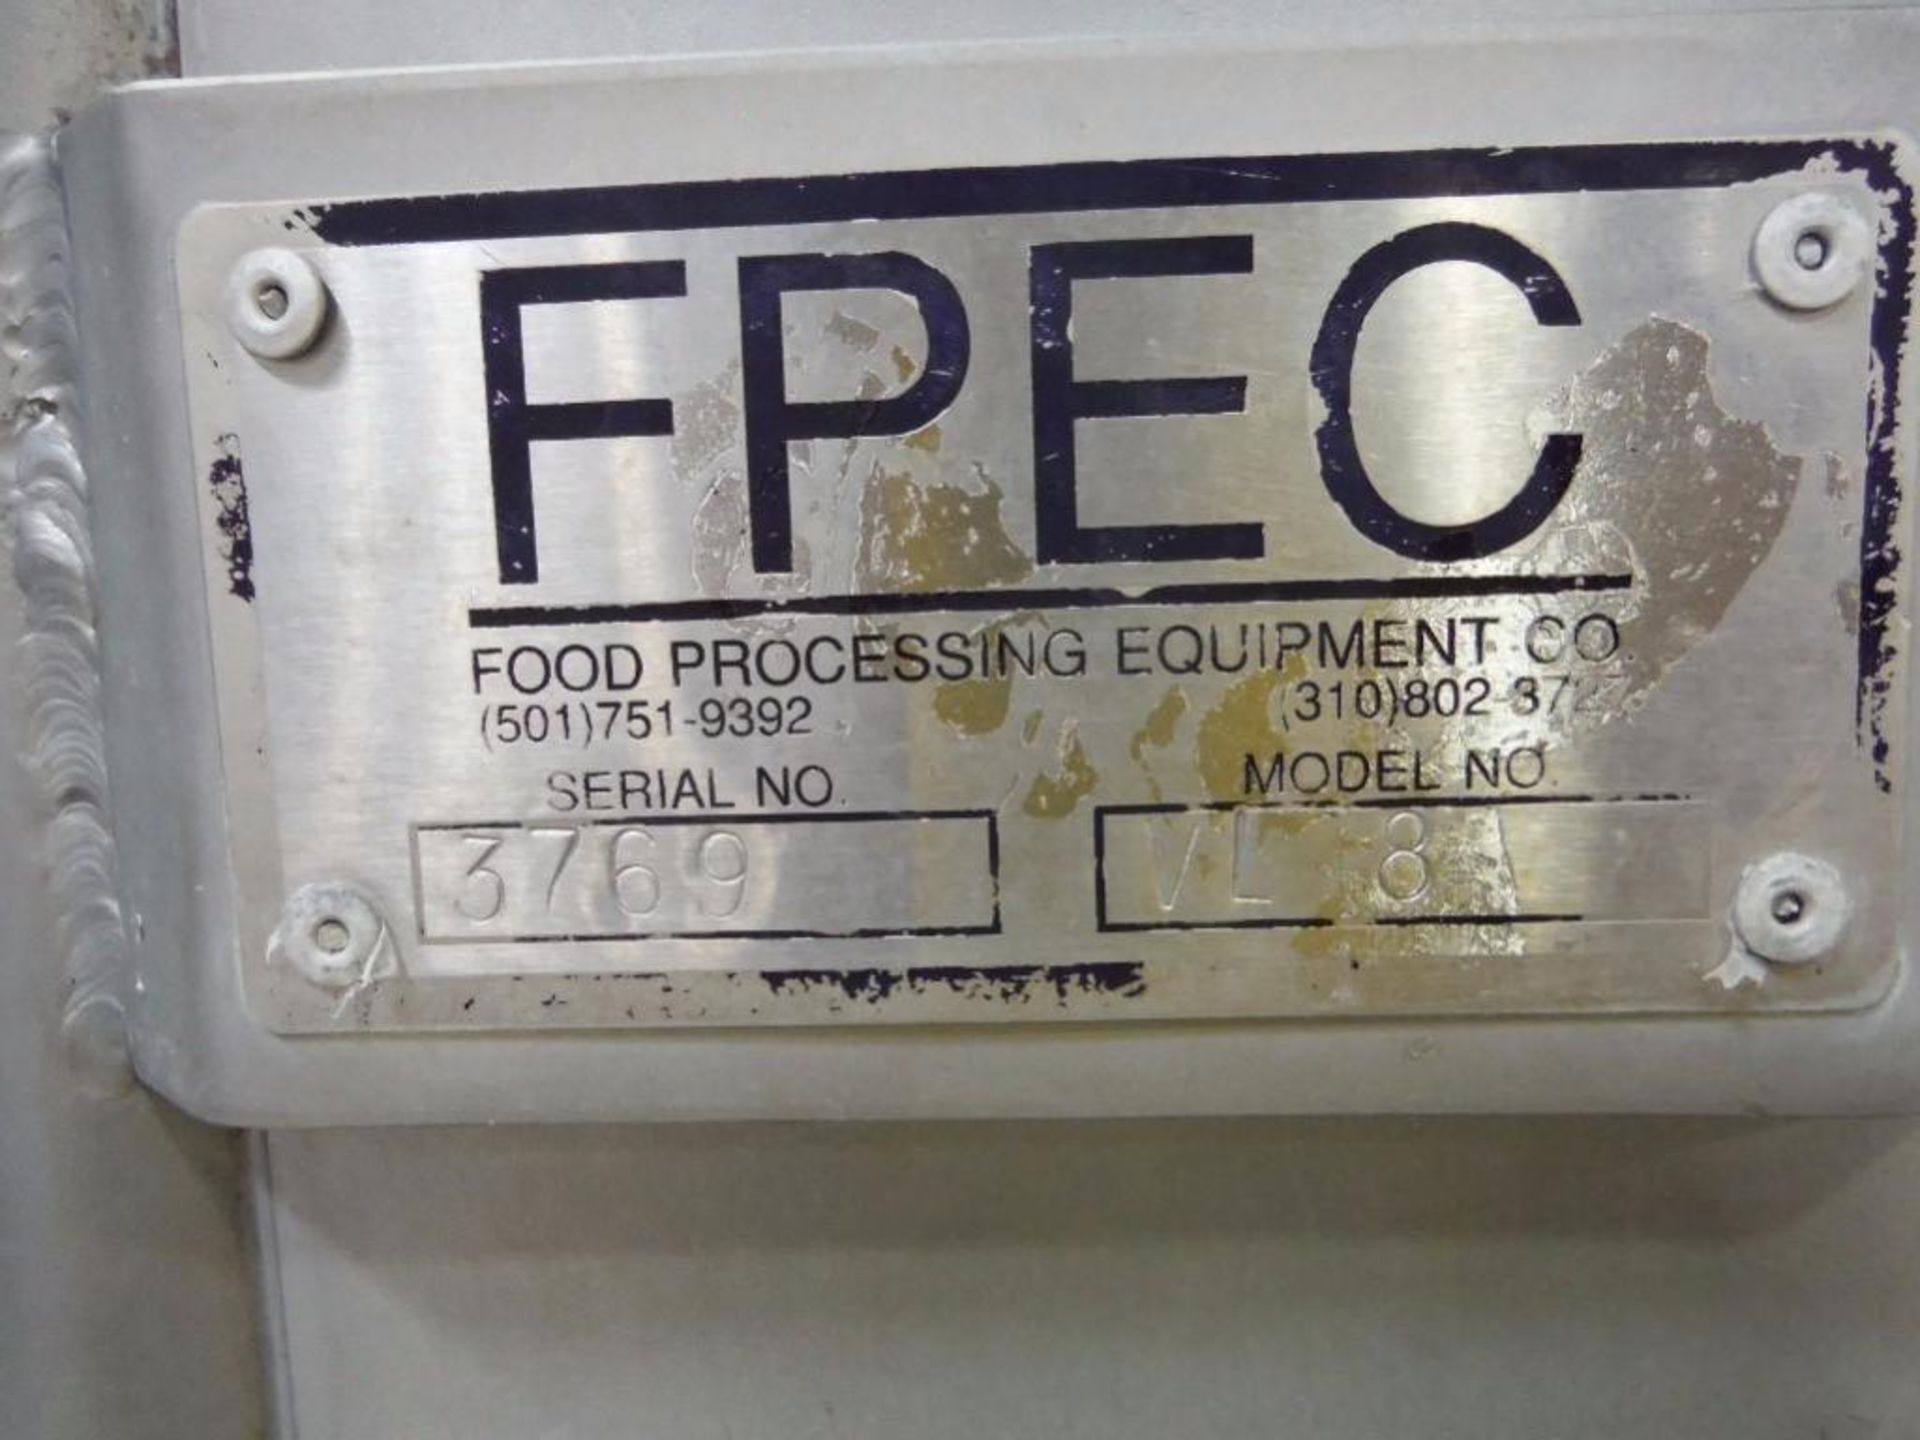 FPEC tote lift, Model VL18, SN 3769, max discharge 12 ft. tall / Rigging Fee: $375 - Image 2 of 5